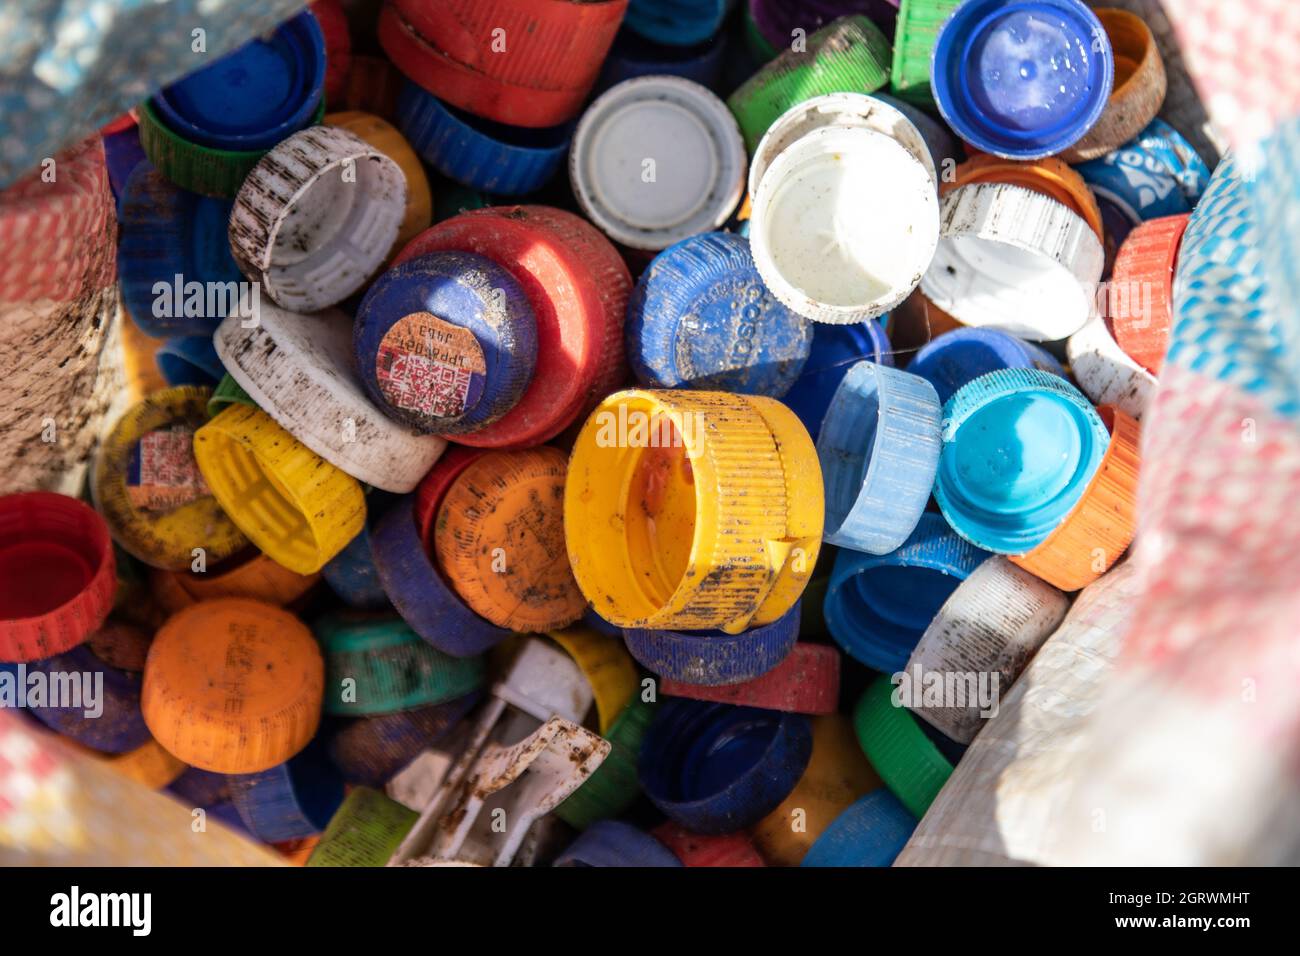 https://c8.alamy.com/comp/2GRWMHT/a-view-of-plastic-bottle-caps-sorted-for-recyclingthe-growing-problem-of-plastic-waste-ending-up-in-the-environment-is-becoming-a-concern-and-environmentalists-are-calling-for-more-investments-in-the-infrastructure-to-recycle-plastic-to-promote-circular-economy-and-reduce-plastic-pollution-they-are-also-asking-the-government-to-introduce-a-mandatory-bottle-deposit-and-refund-scheme-drs-which-will-give-value-to-plastic-drink-bottles-commonly-known-as-pet-polyethylene-terephthalate-deposit-refund-scheme-is-a-system-where-consumers-pay-a-small-amount-of-money-upfront-called-a-deposit-to-b-2GRWMHT.jpg